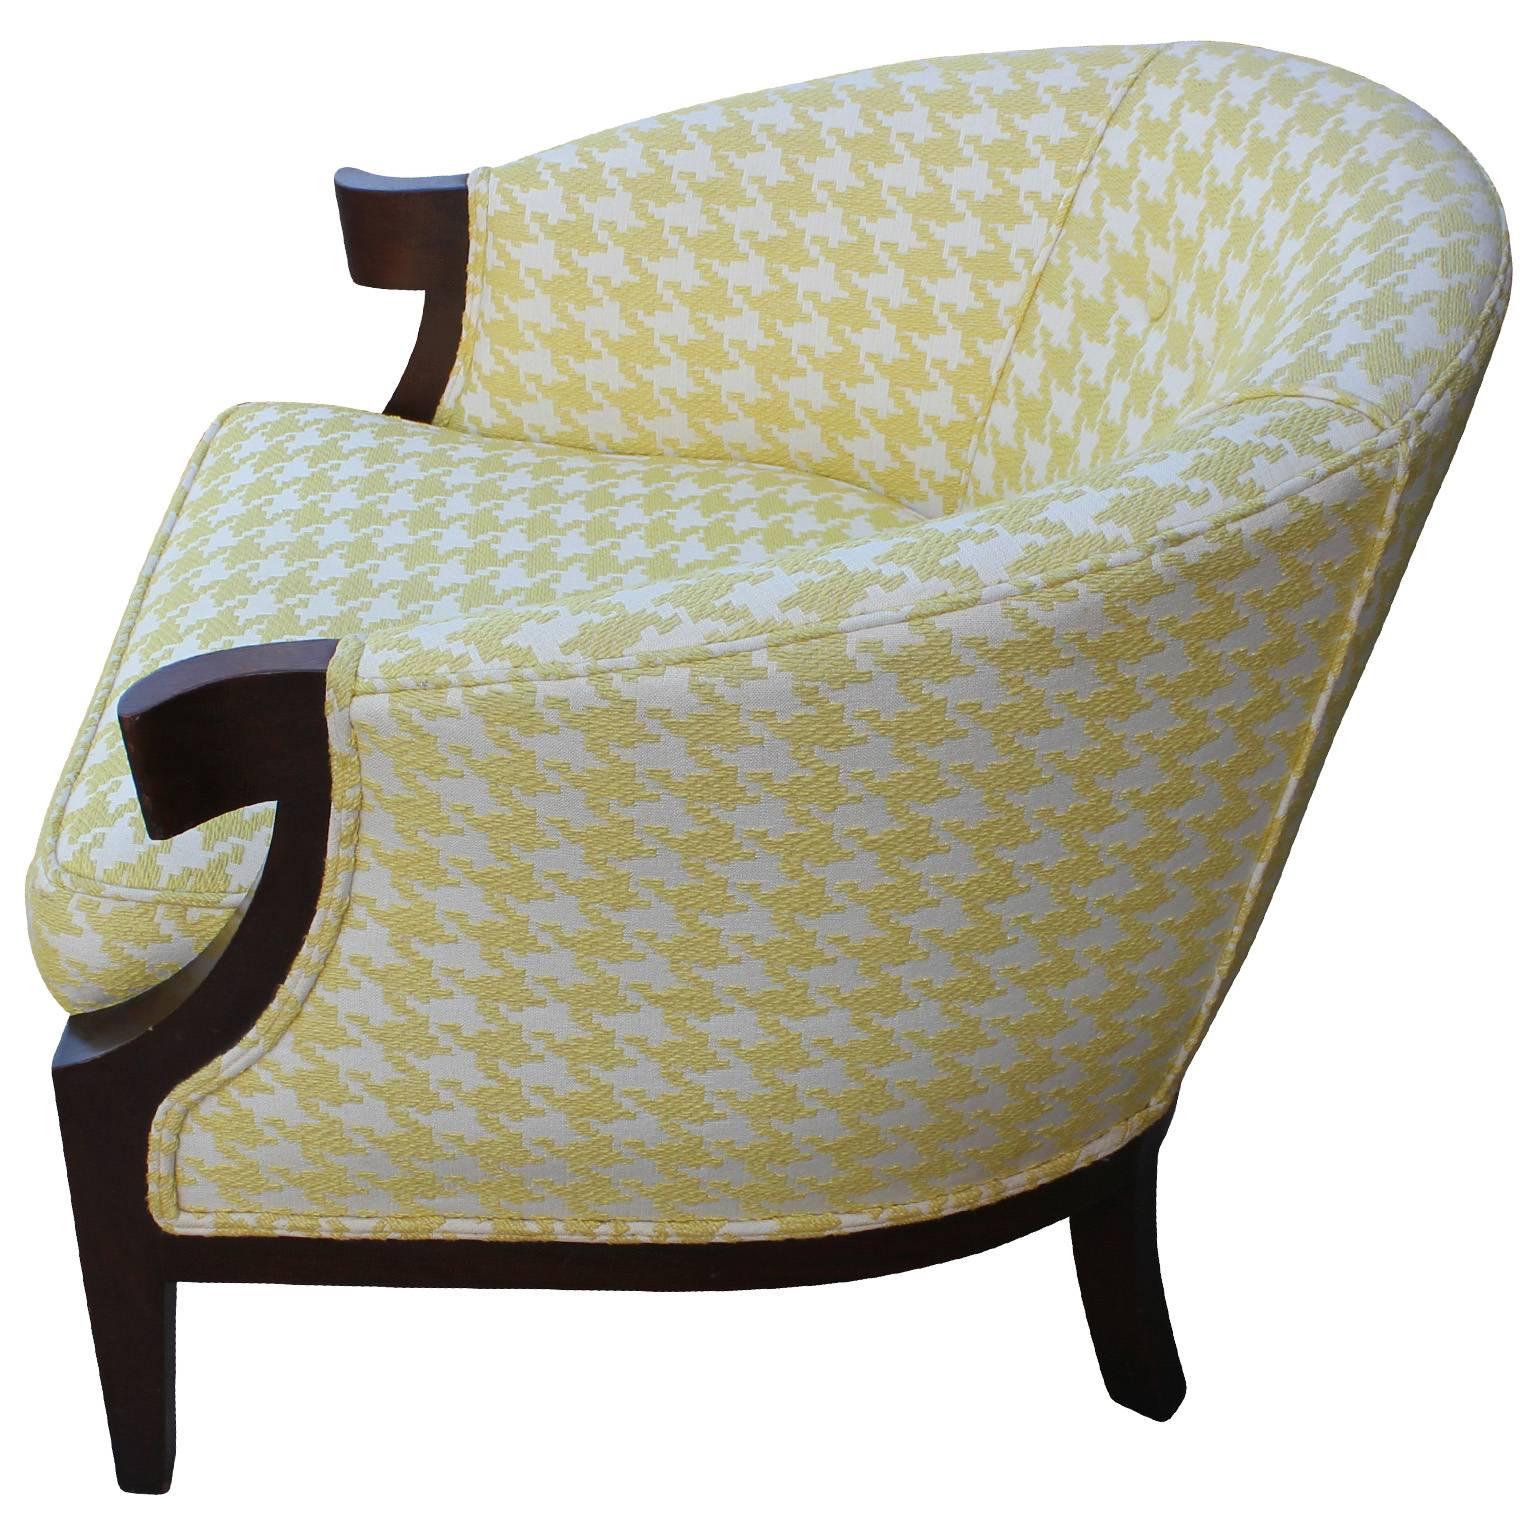 American Baker Houndstooth Curved Arm Lounge Chairs